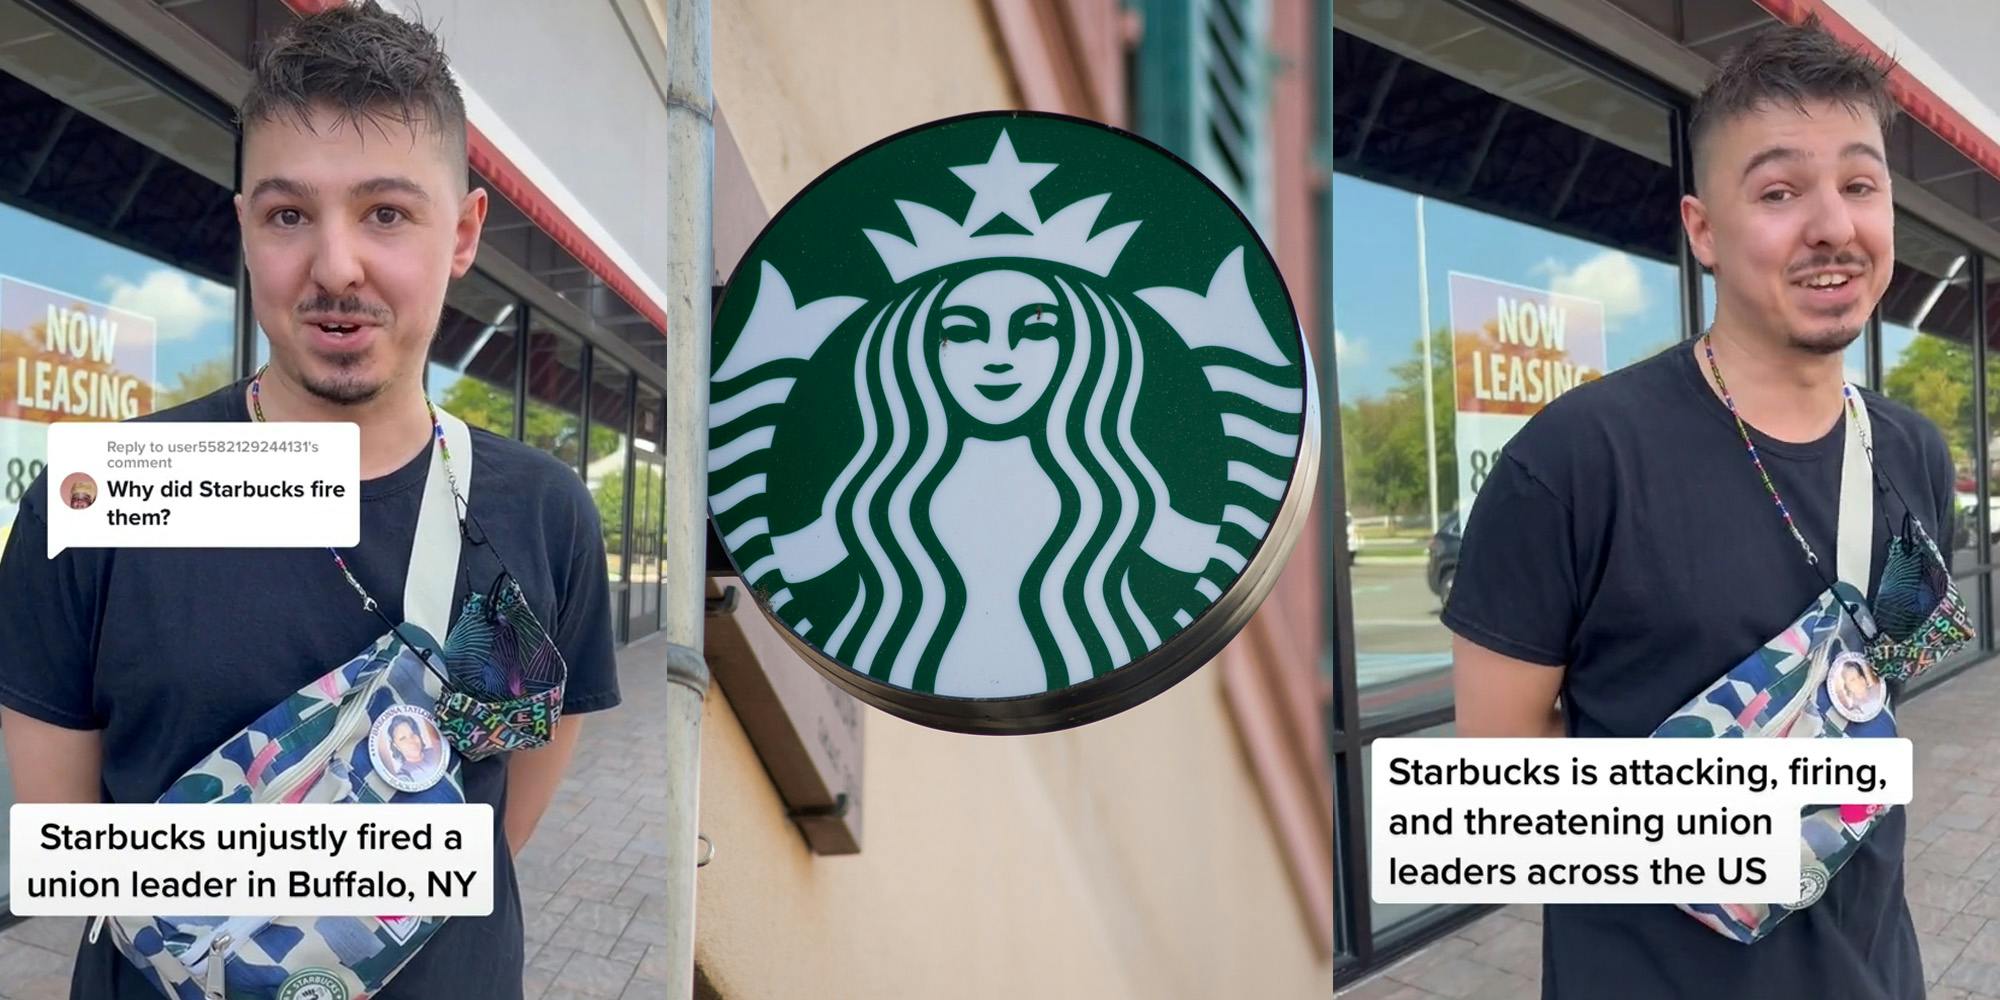 man speaking outside caption "Why did Starbucks fire them? Starbucks unjustly fired a union leader in Buffalo, NY" (l) Starbucks sign (c) man speaking outside caption "Why did Starbucks fire them? Starbucks is attacking, firing, and threatening union leaders across the US" (r)